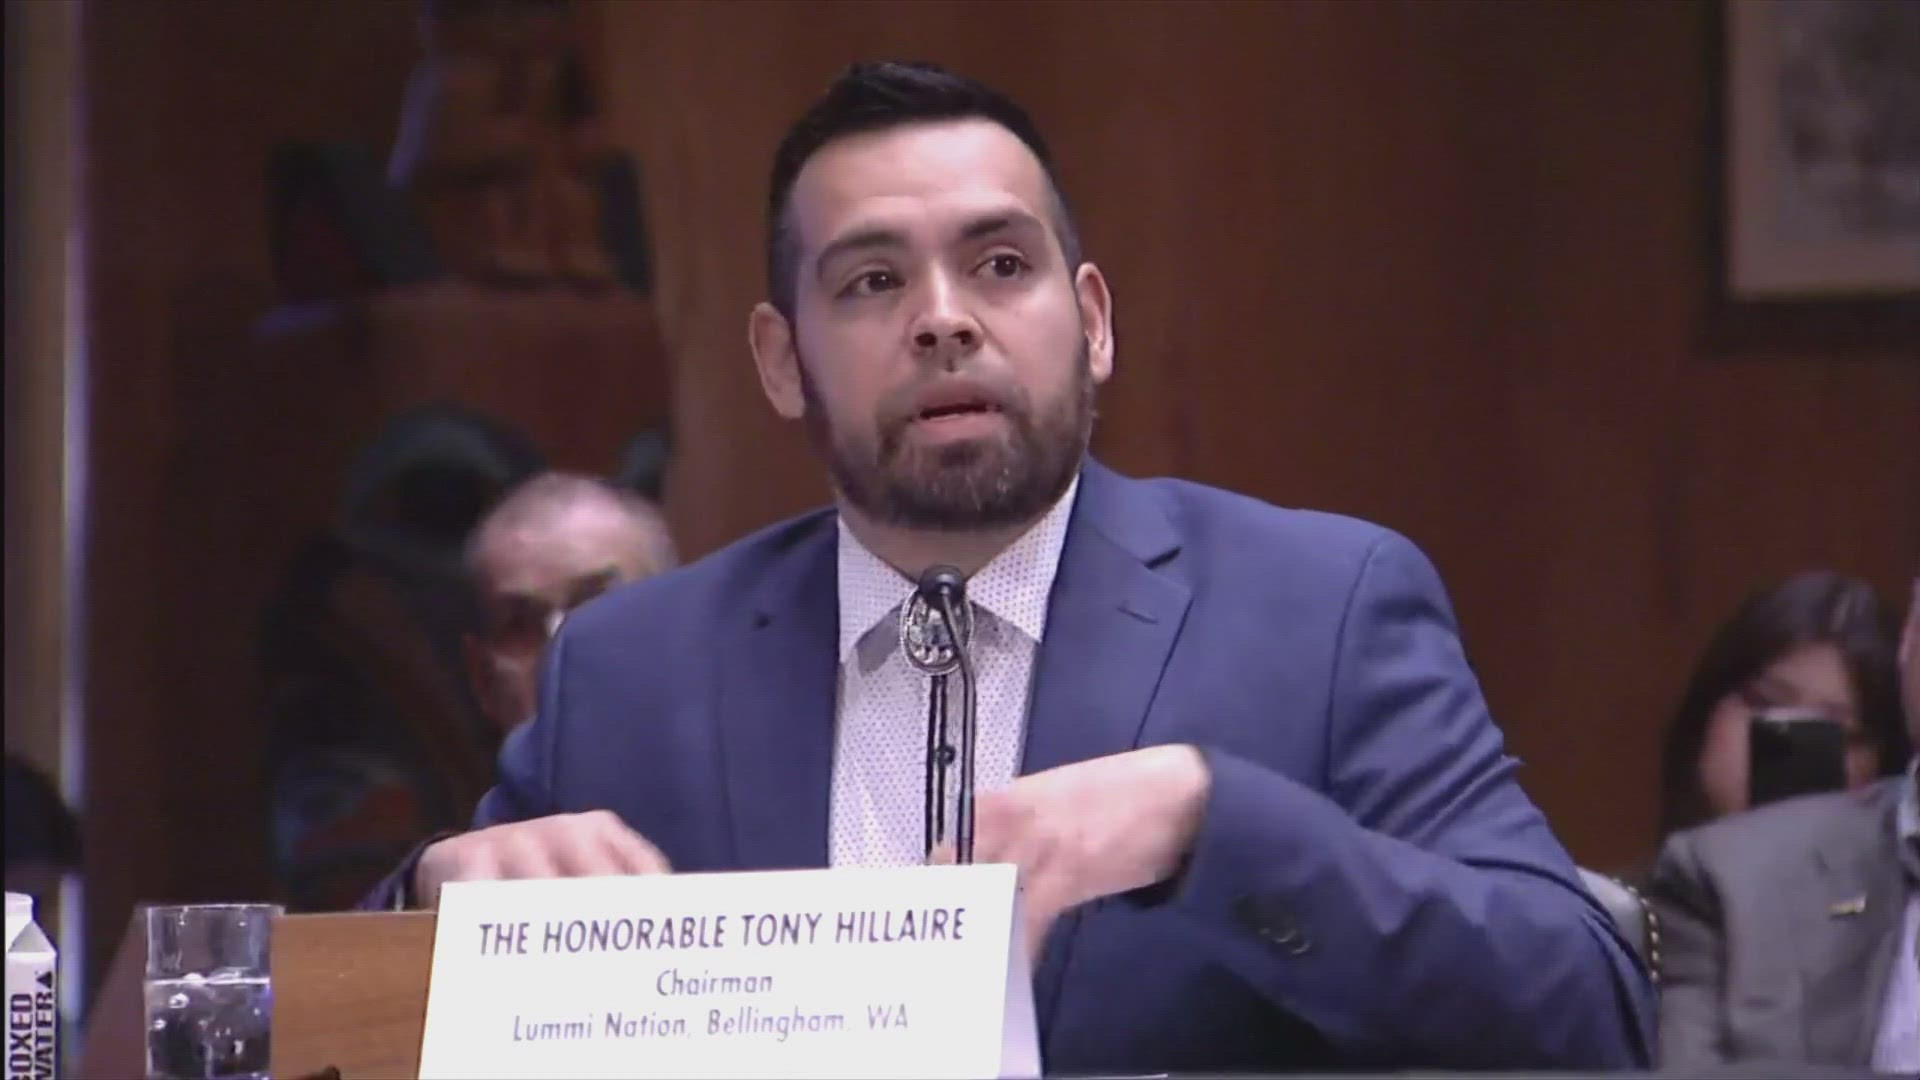 Lummi Nation chairman Tony Hillaire testified in Washington D.C. on Wednesday about the fentanyl crisis facing his community